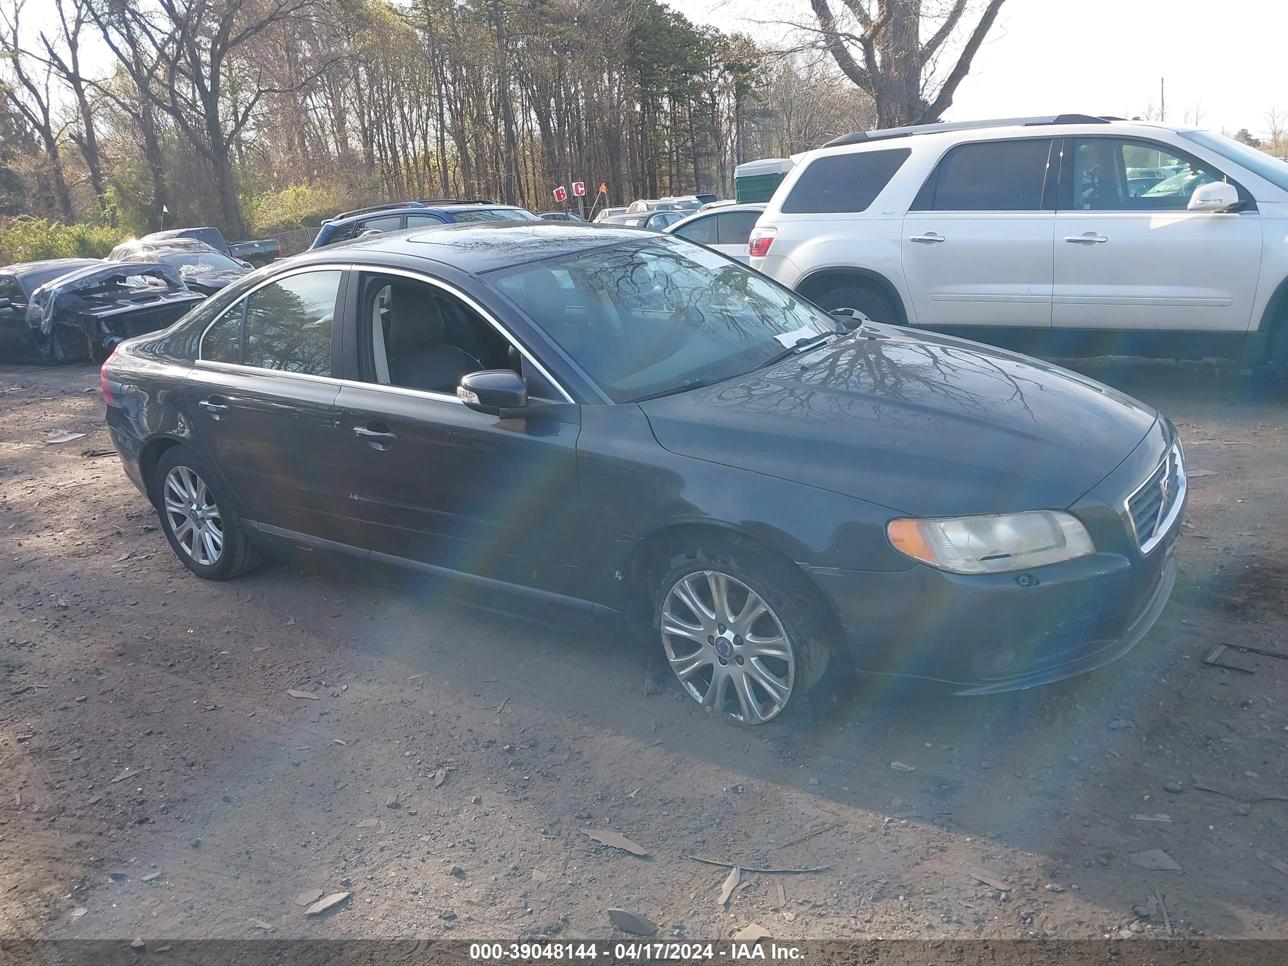 vin: YV1AS982191094867 YV1AS982191094867 2009 volvo s80 3200 for Sale in 11763, 21 Rice Ct, Medford, New York, USA